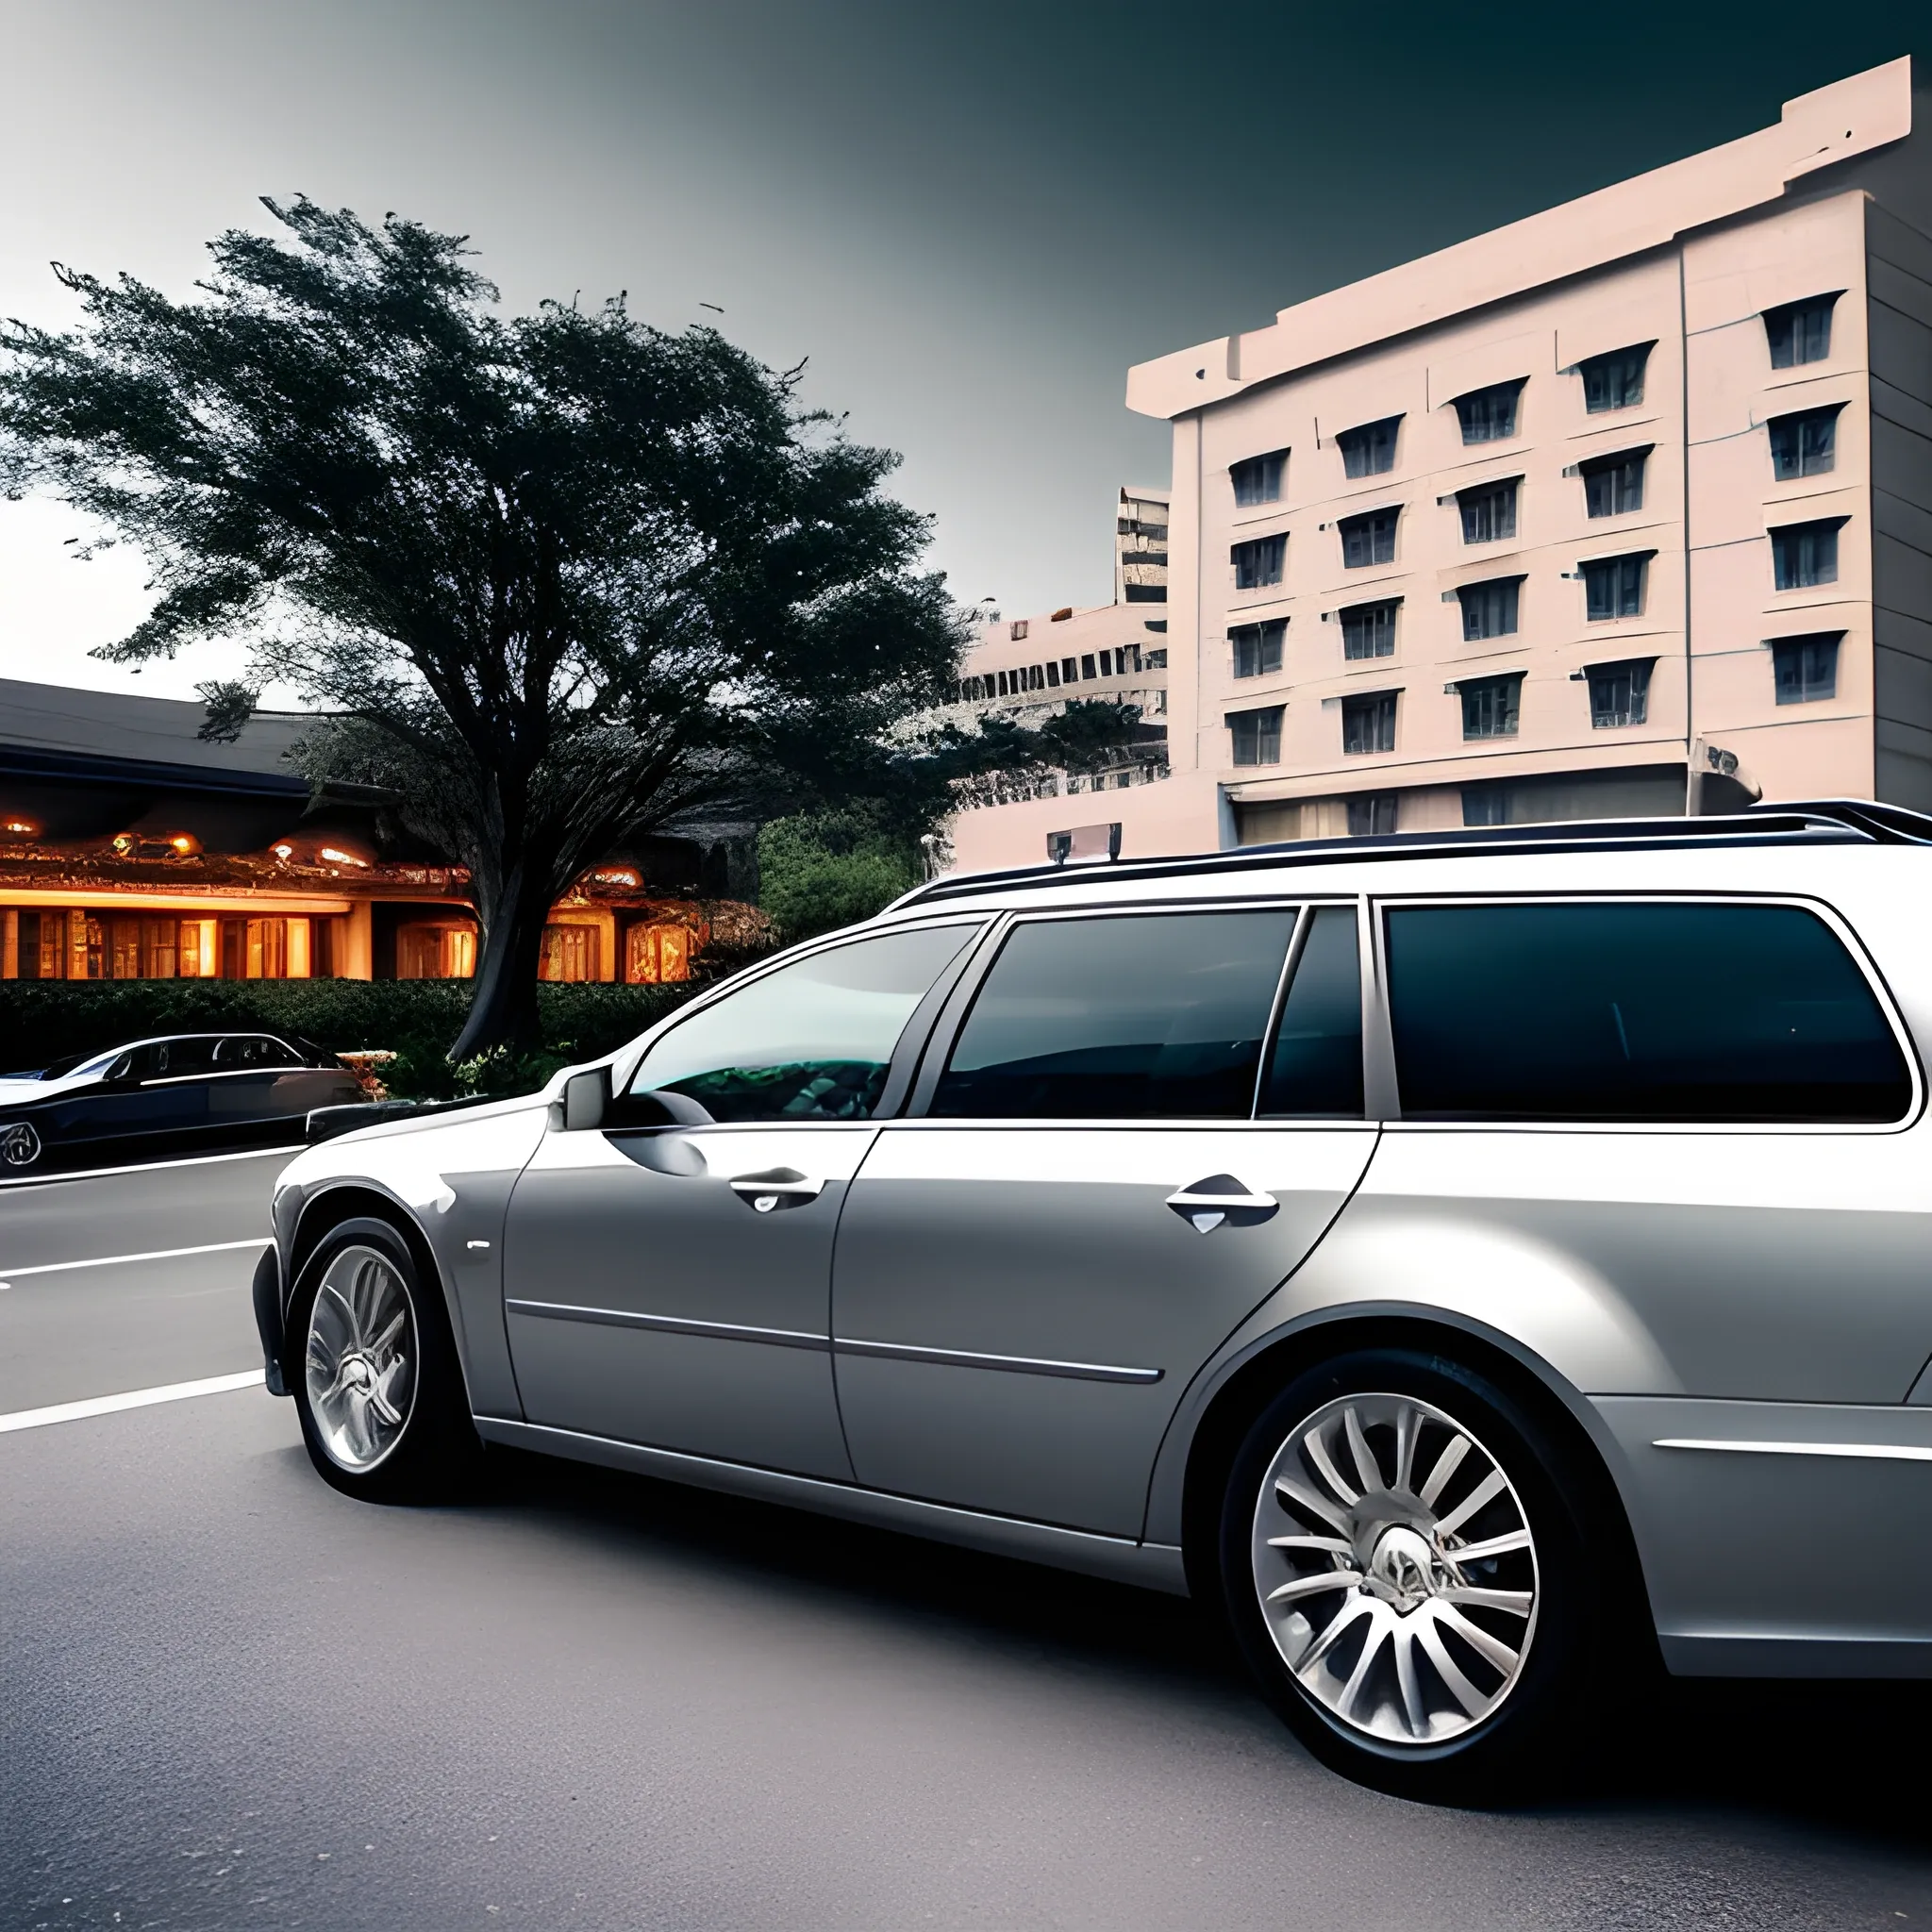 Anstation wagon，Parked in front of the hotel，The hotel is very luxurious，Take a longer view，car is silver，car looks fancy，Style like photography，Modern situation



